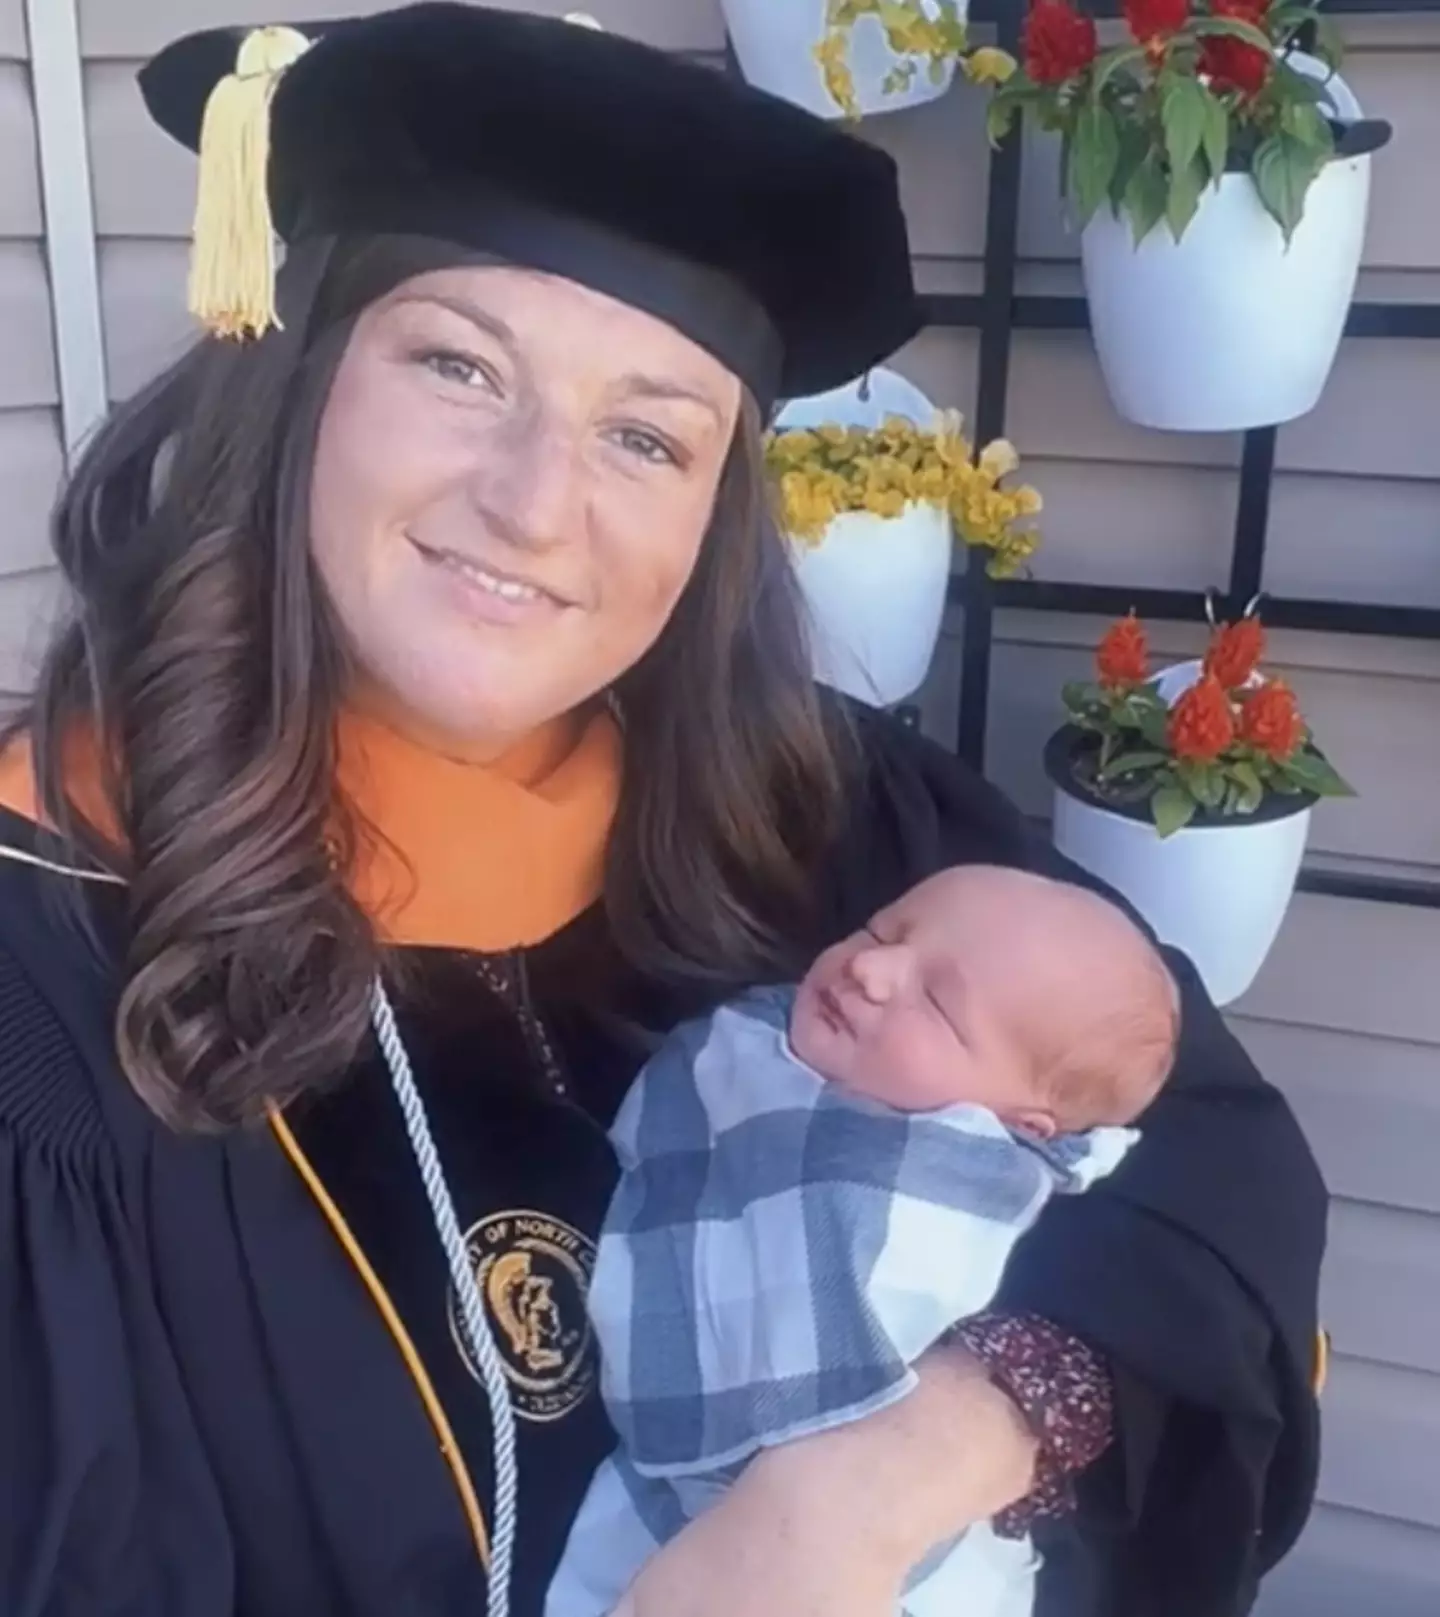 Bailiff's husband and newborn son watched the graduation ceremony via FaceTime.